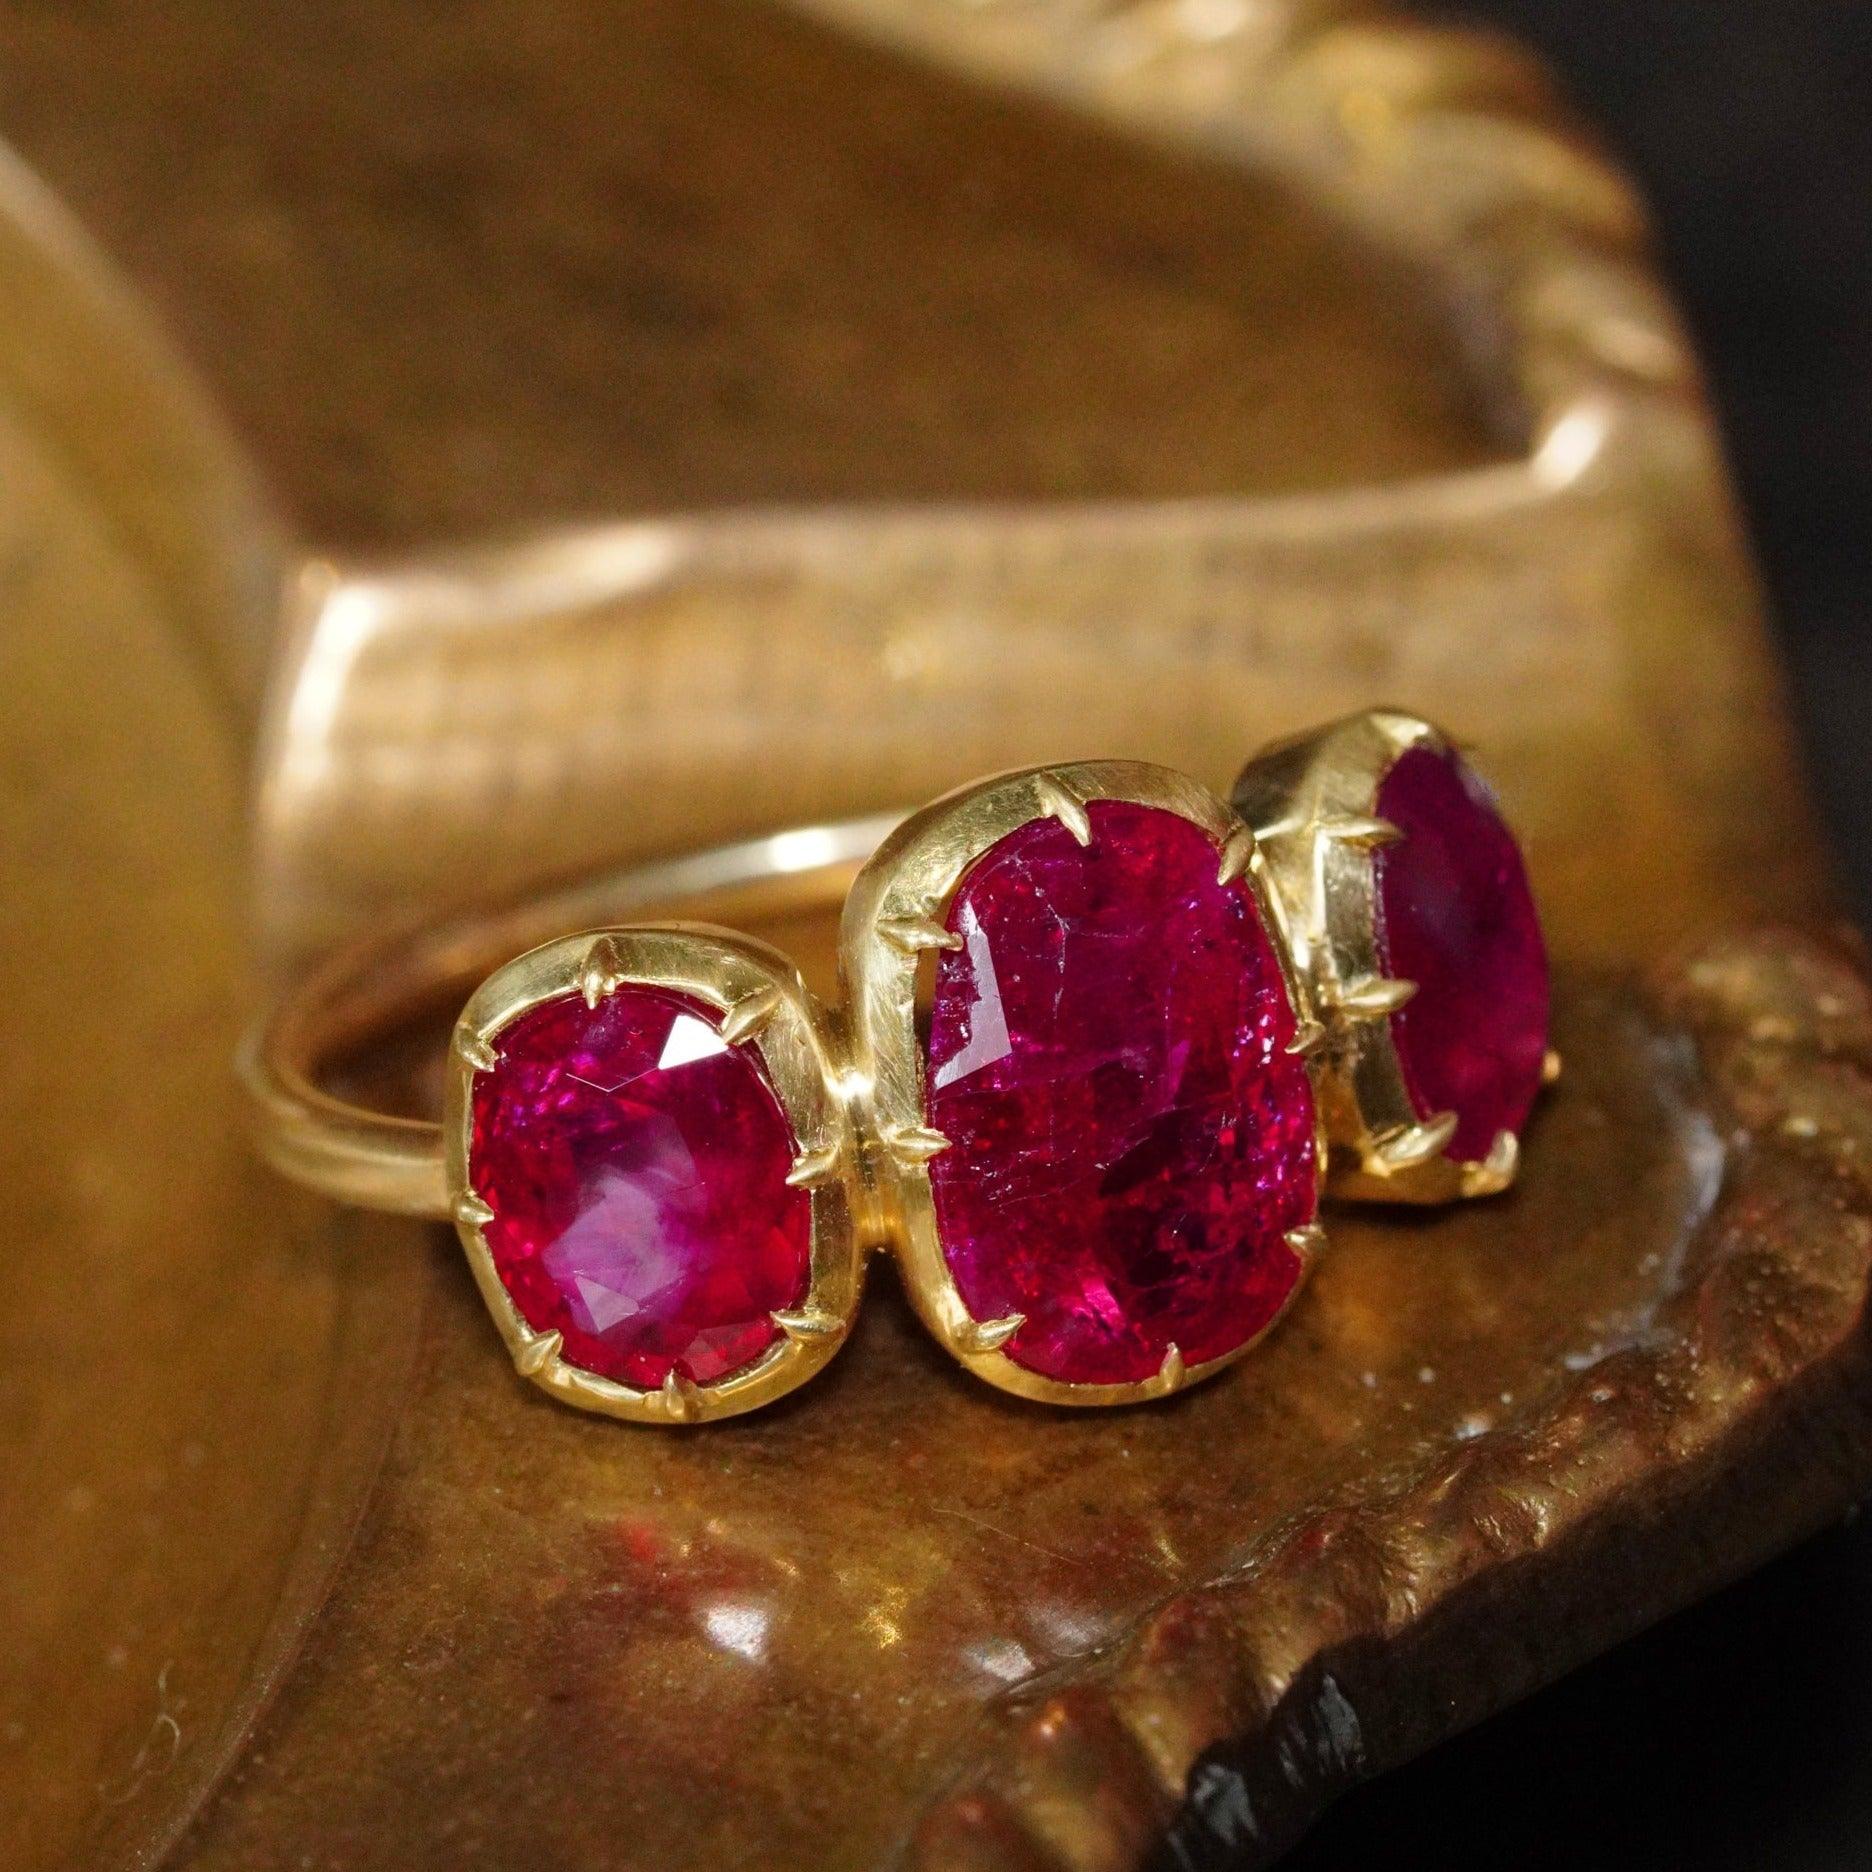 Romantic Burma No Heat Ruby Collet Ring: A Victorian-style